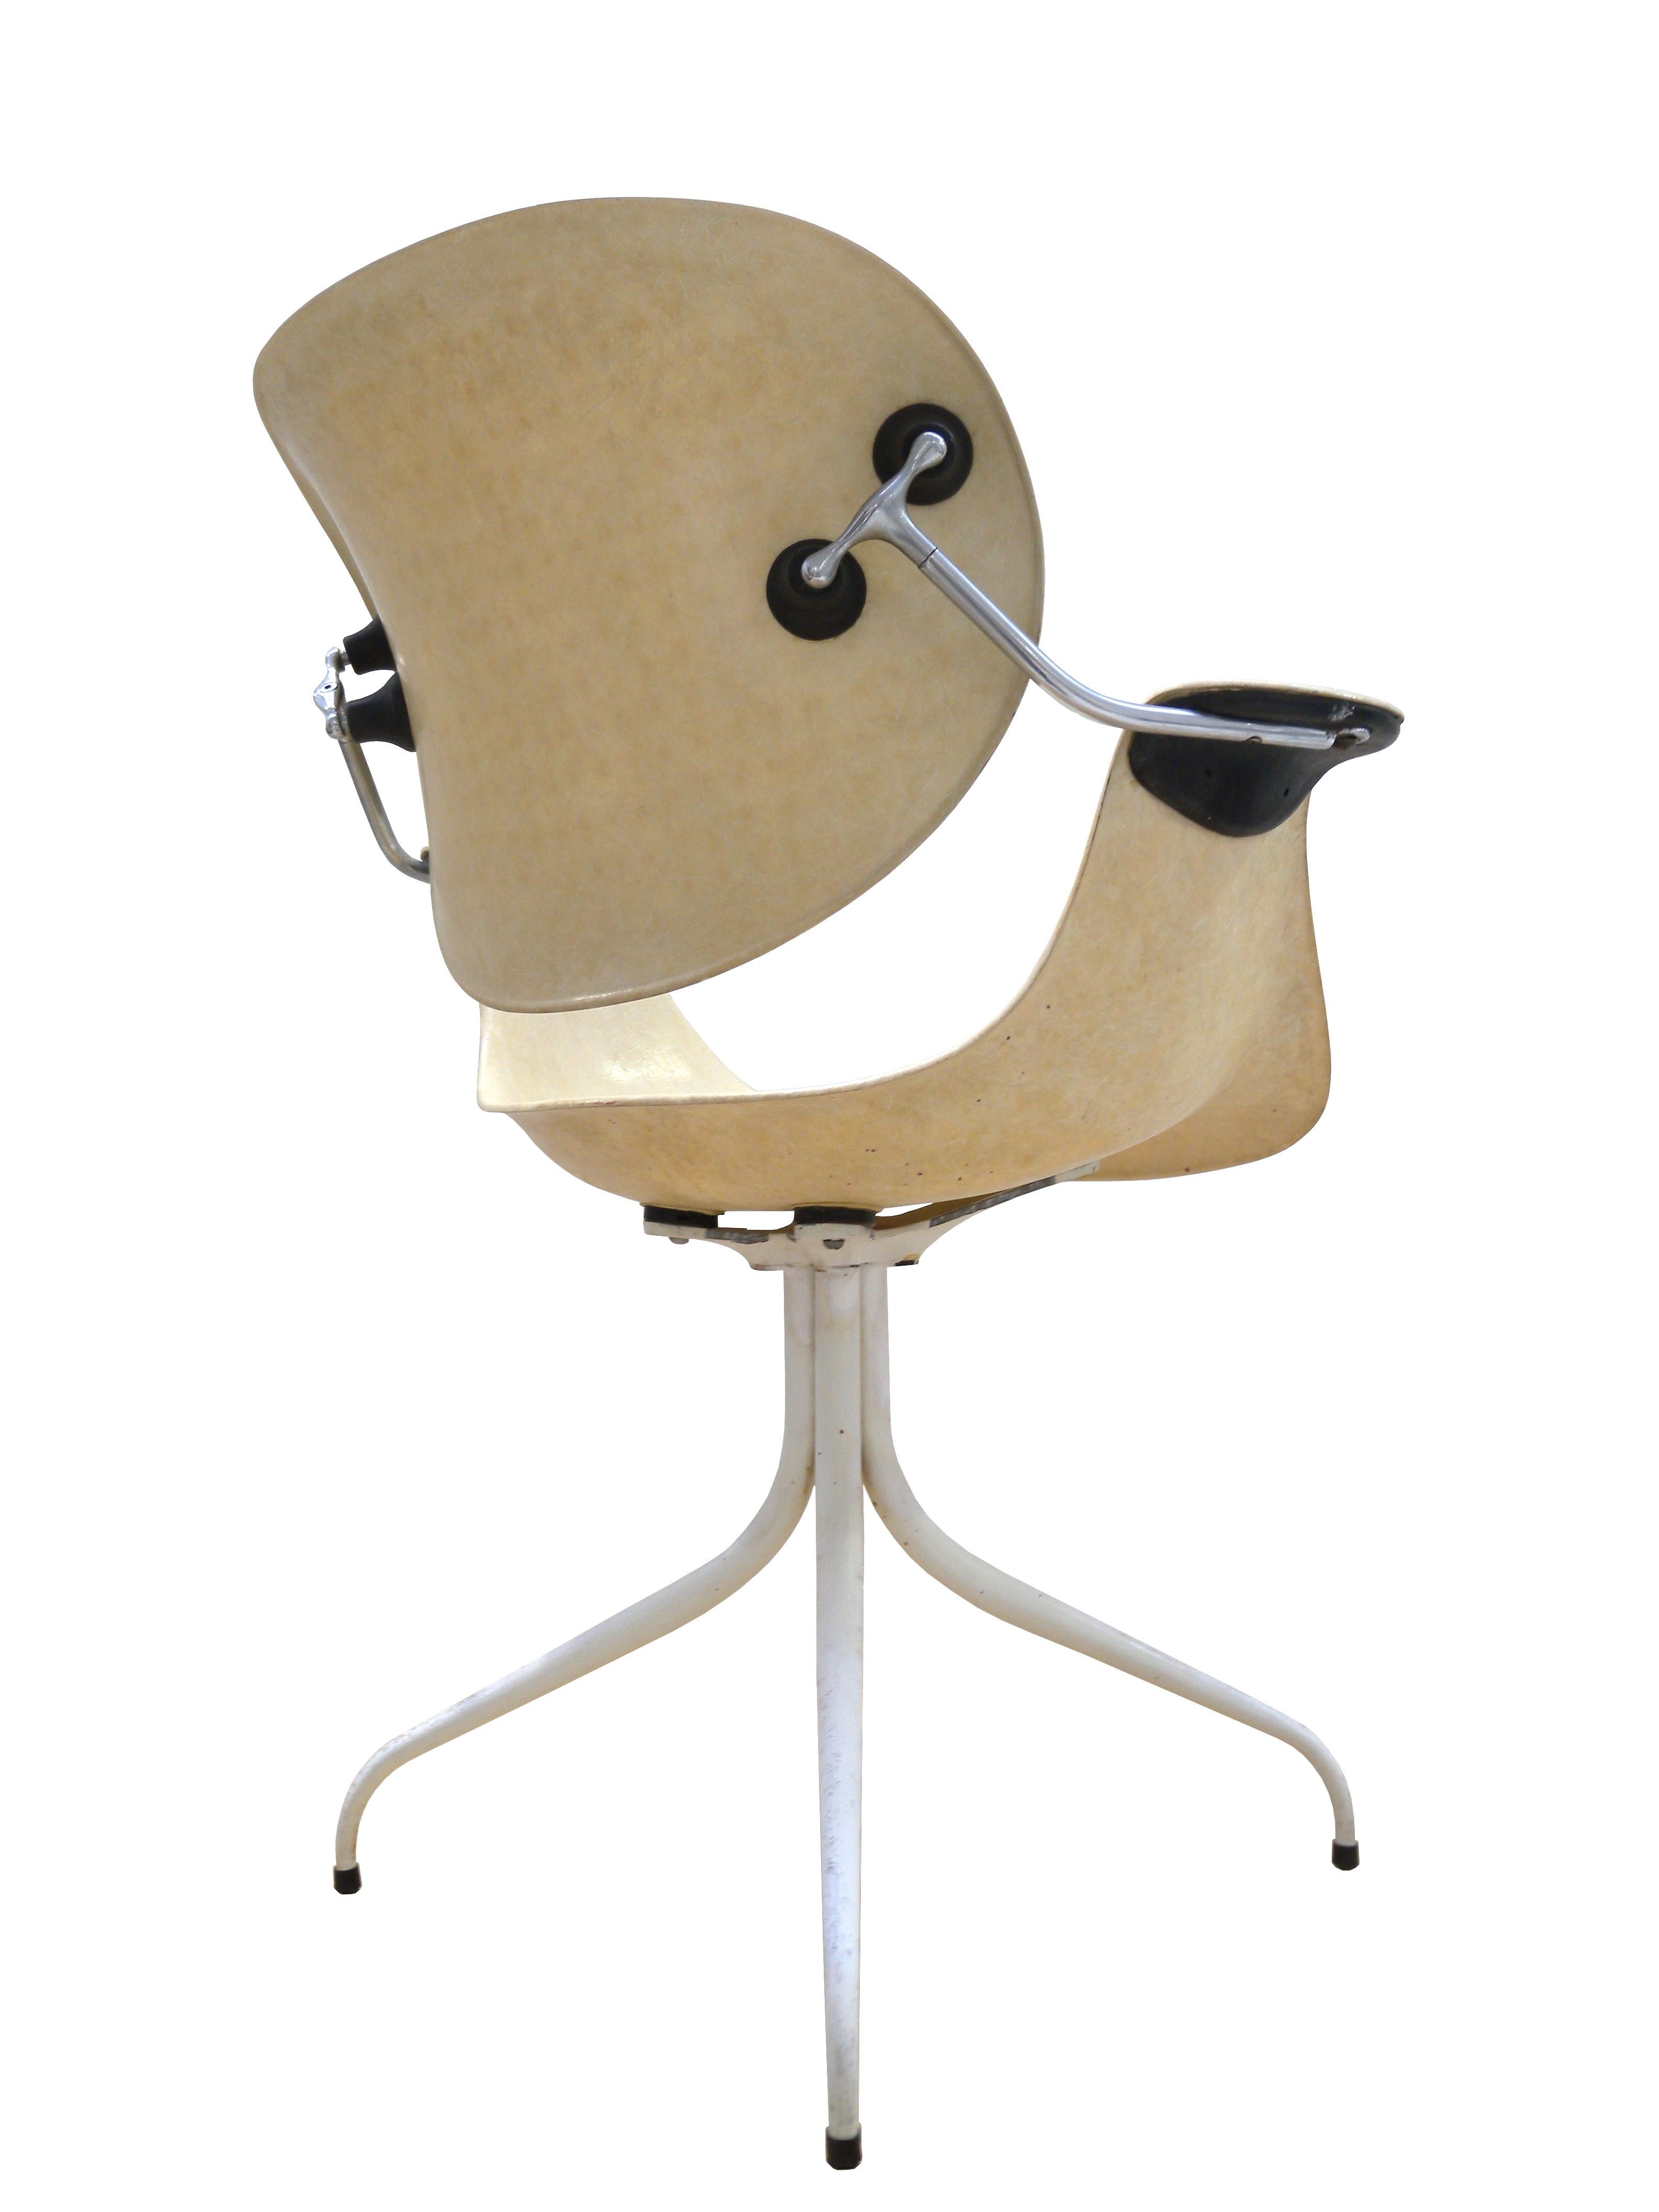 The “swag leg chair” was designed by George Nelson in 1958 for Herman Miller. In production between 1958-1964.

Tubular steel, molded plastic shell, and rubber. 

This molded plastic chair formed part of a collection of tables and chairs called